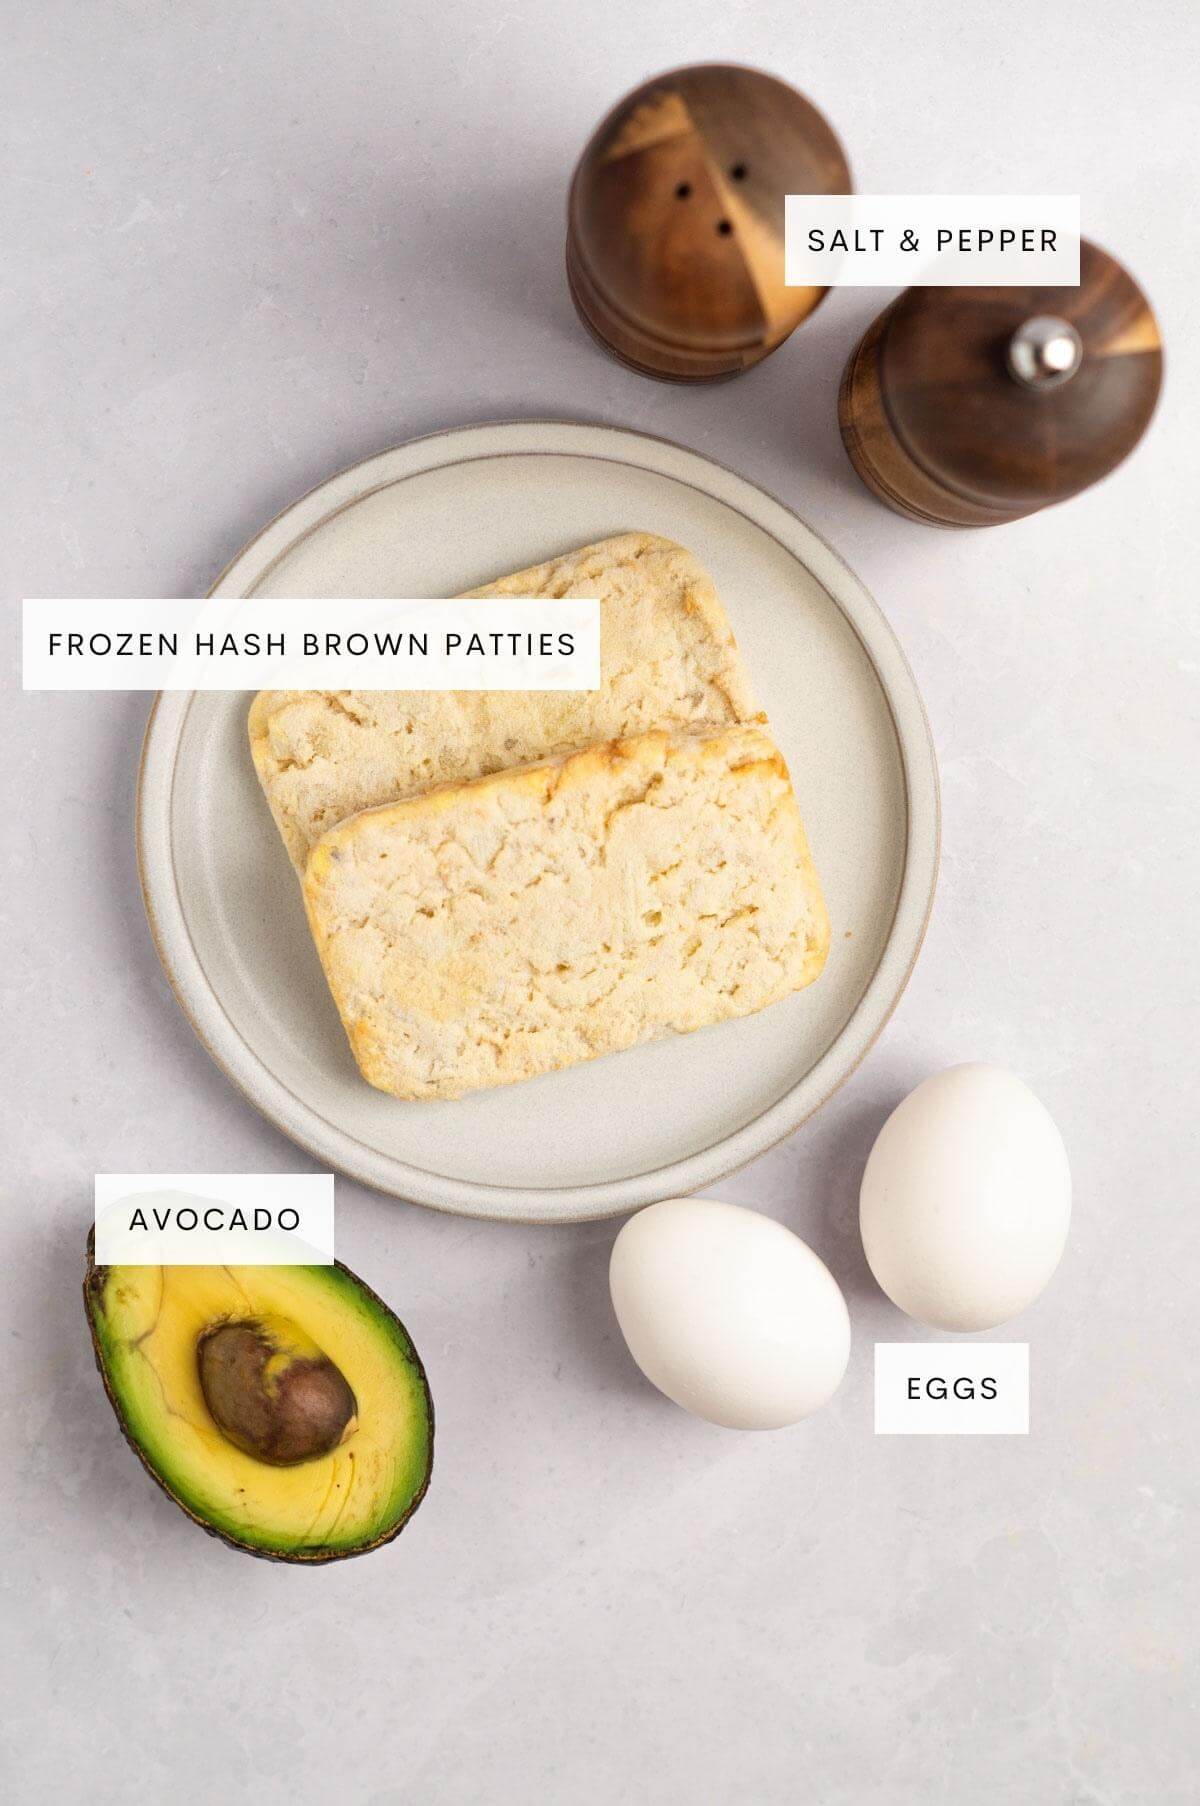 Ingredients needed for hash brown avocado toast: salt and pepper, frozen hash brown patties, eggs, and avocado.